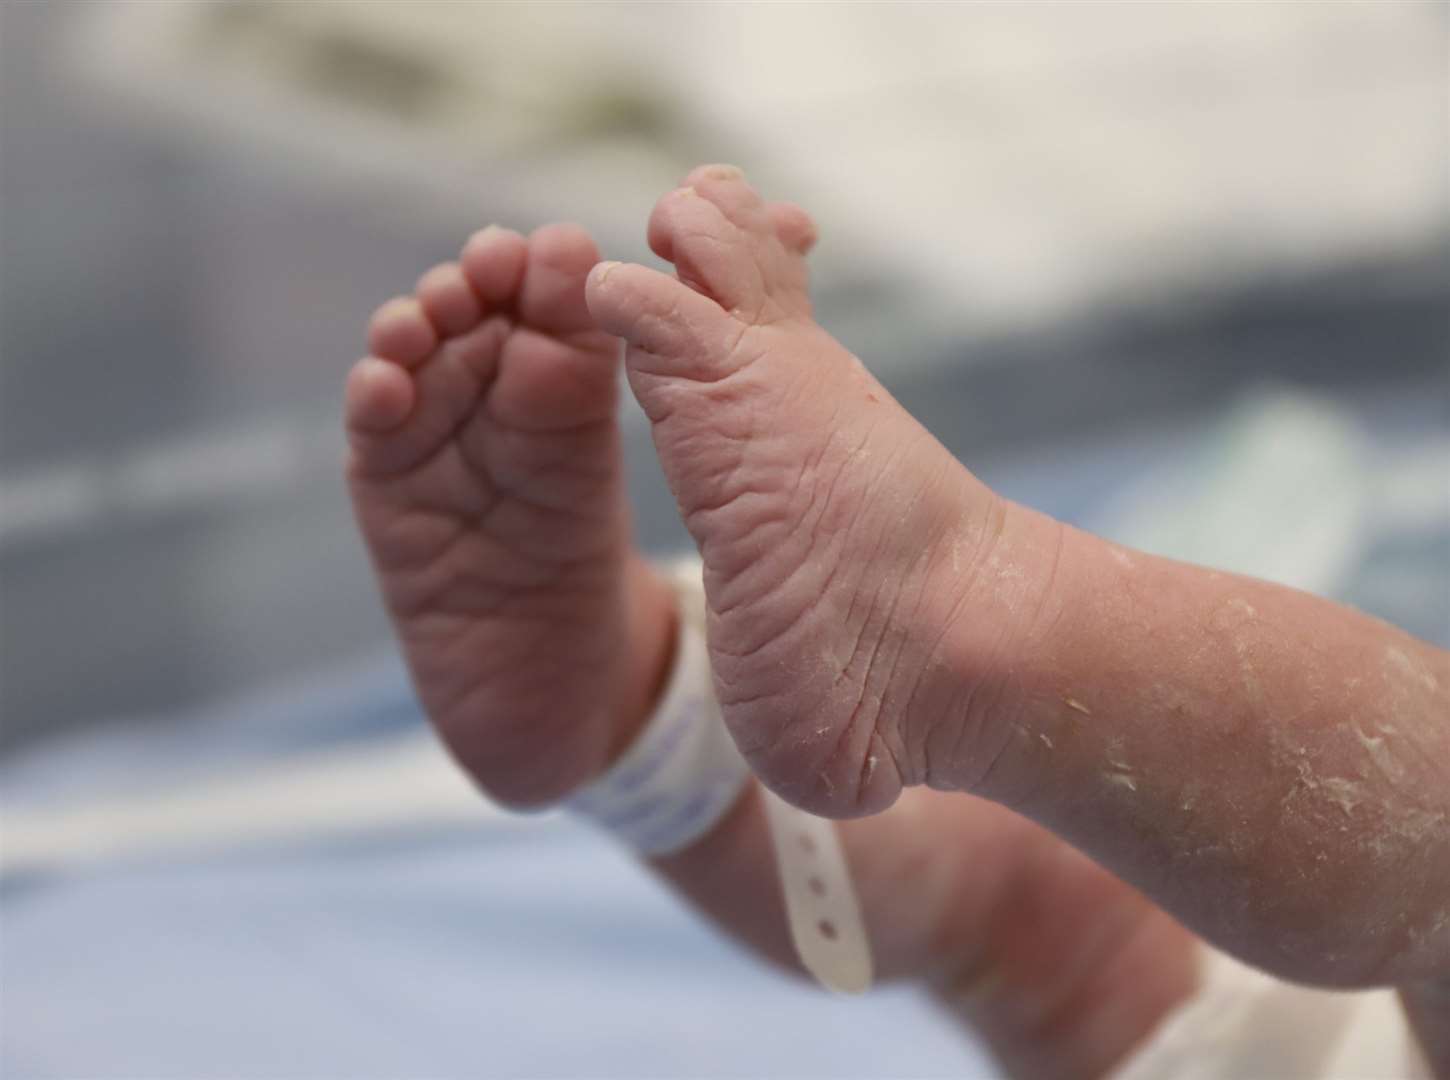 Babies who lack essential nutrition as newborns can be placed at a disadvantage. Image: iStock.